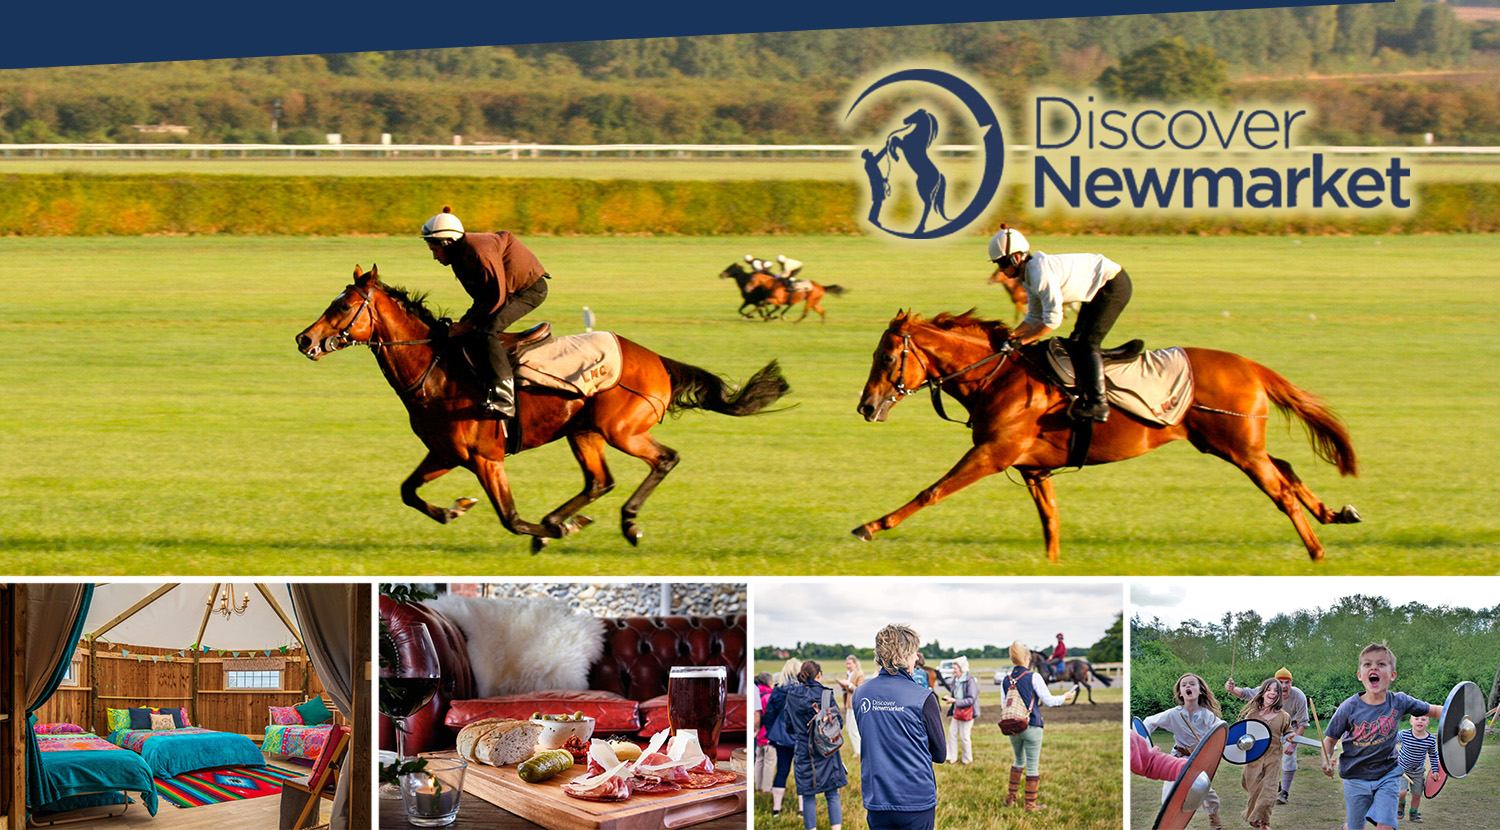 Discover Newmarket